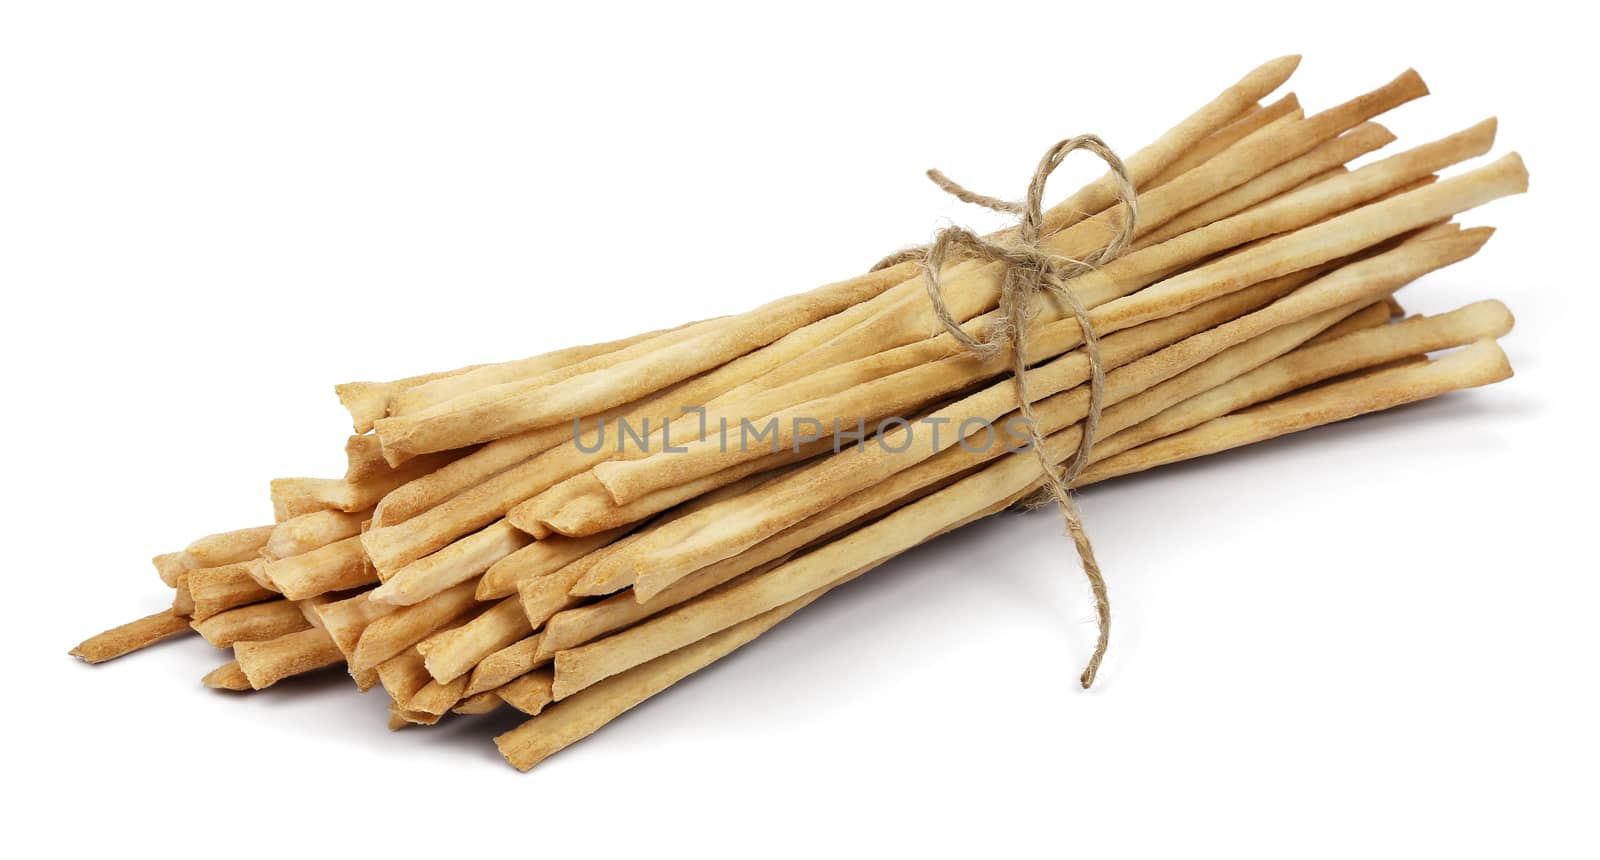 Crispy crunchy long bread sticks tied with rope, isolated on a white background.